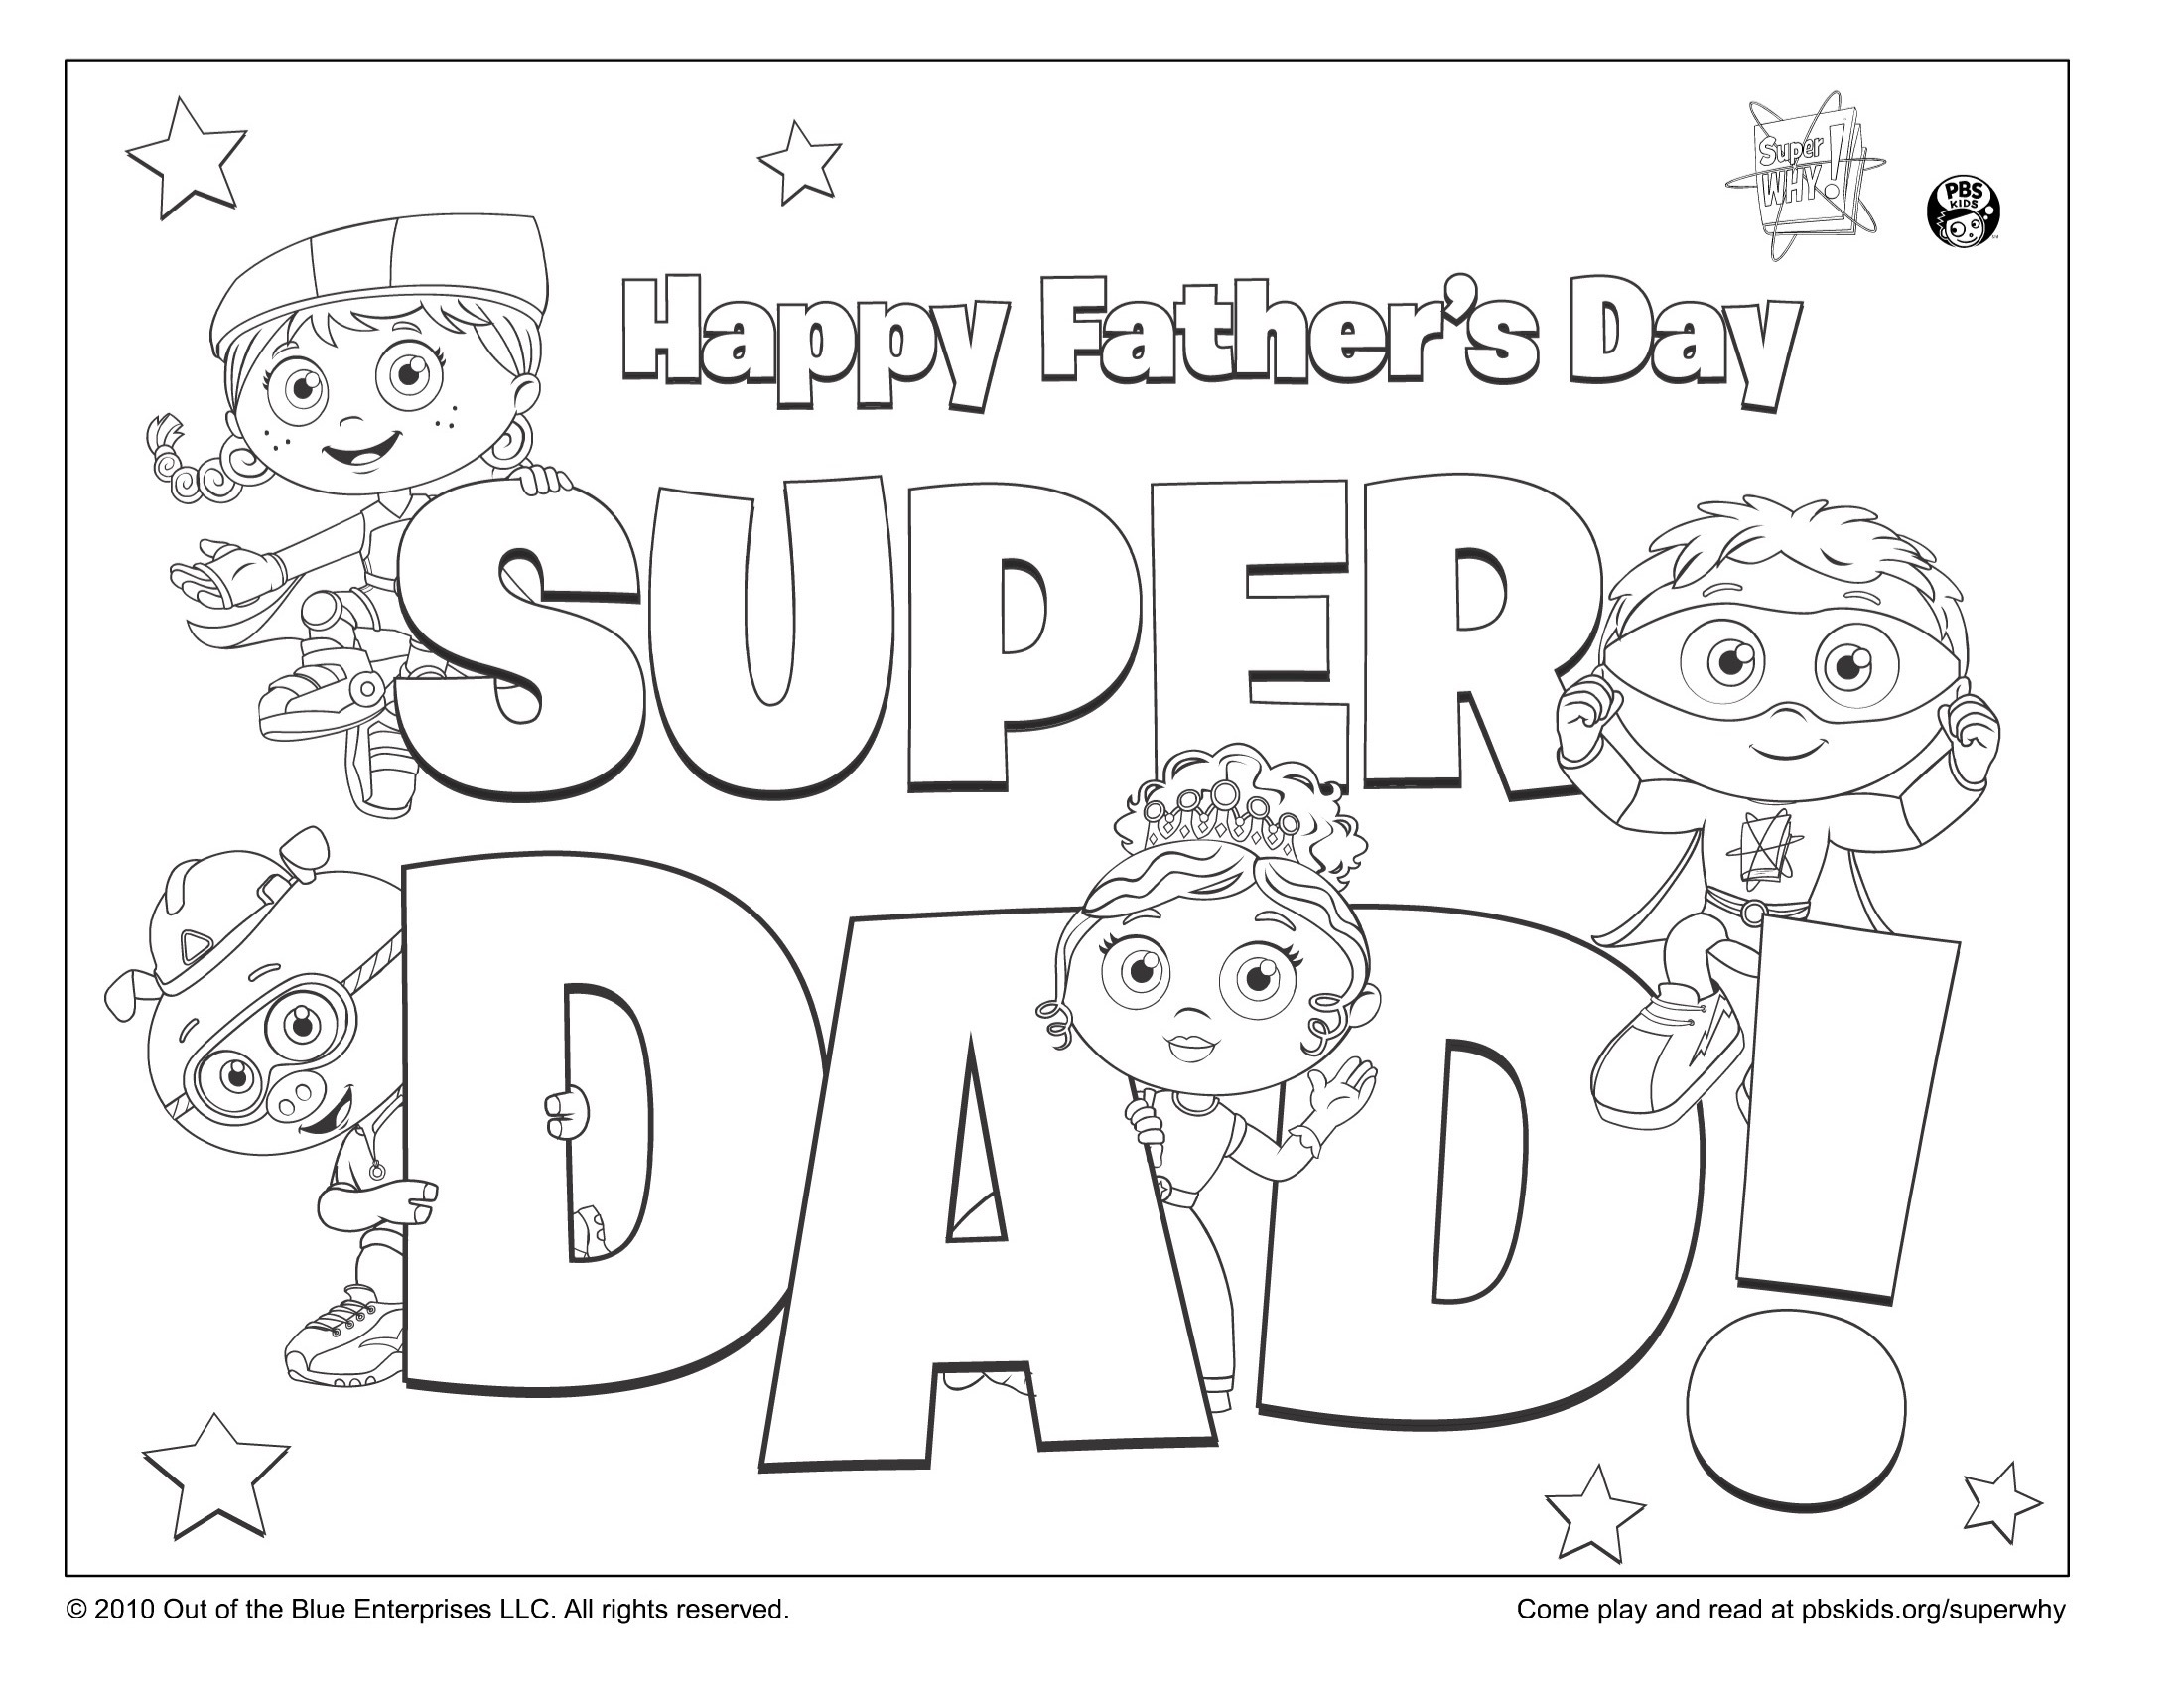 Super Dad! Coloring Page | Kids Coloring Pages | PBS KIDS for Parents